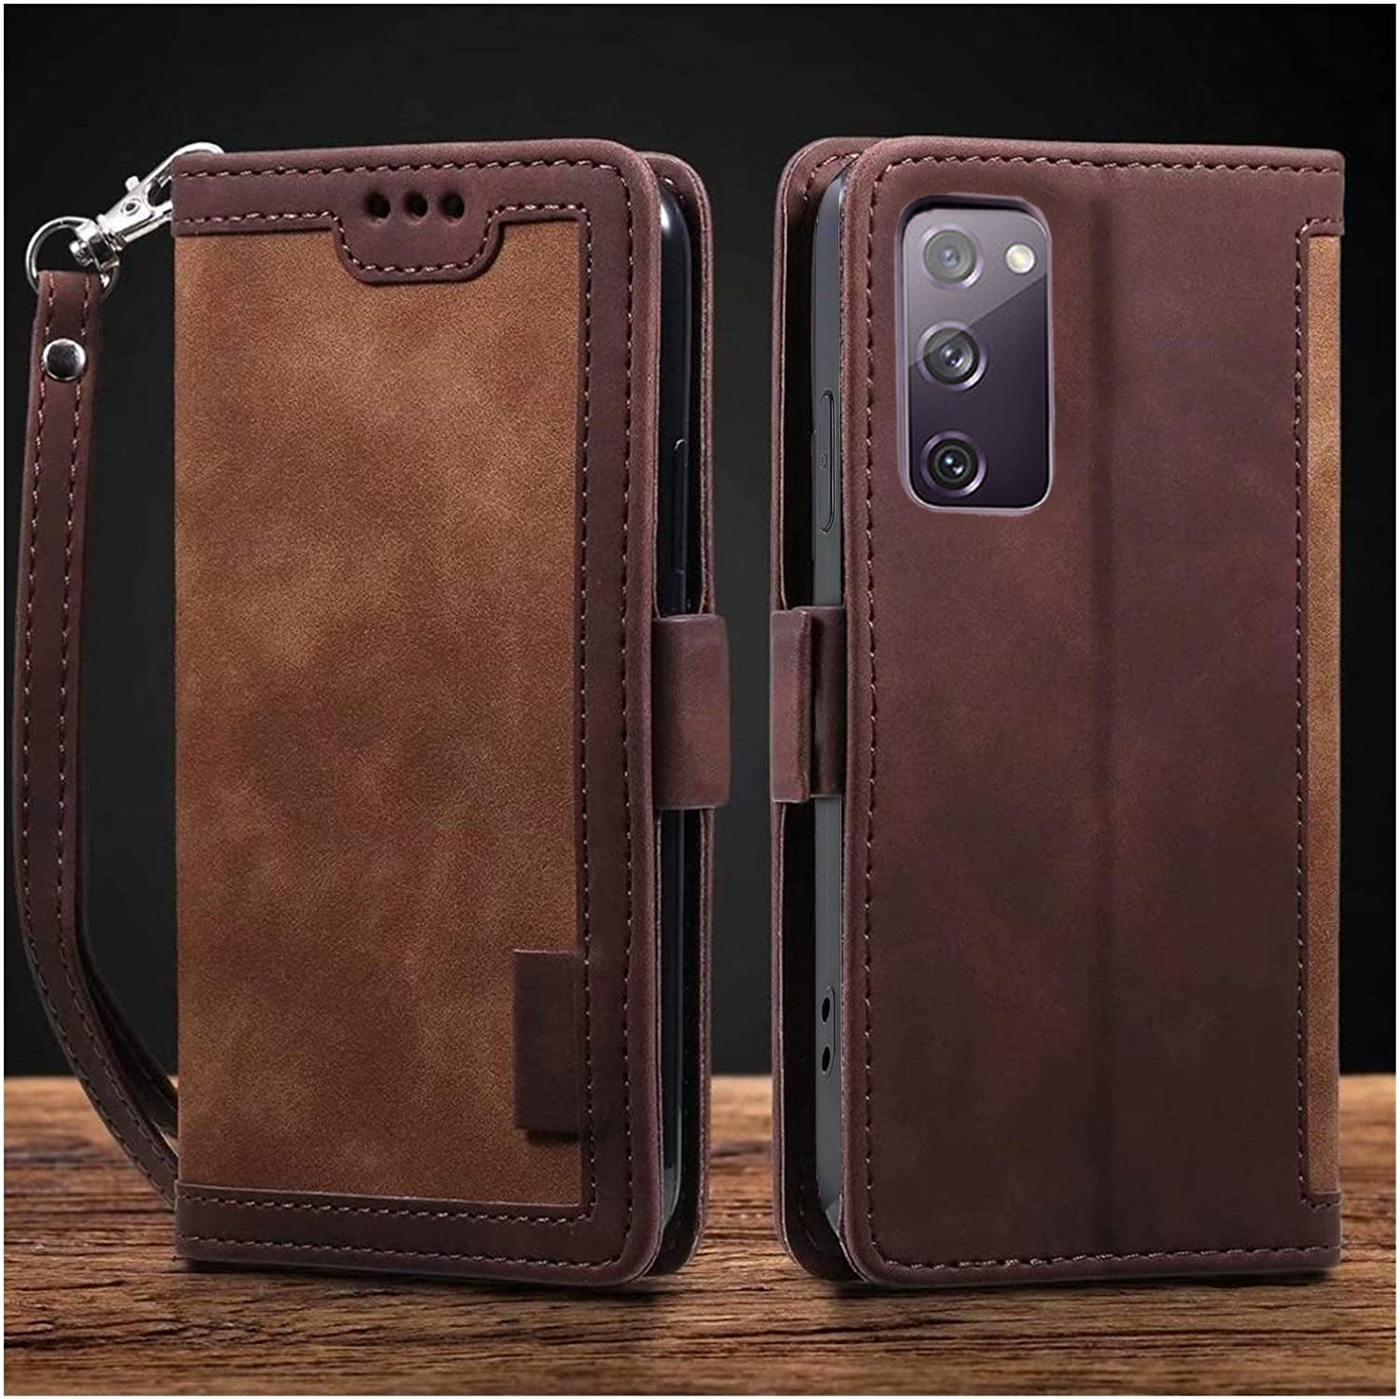 Samsung Galaxy S20 FE Coffee color leather wallet flip cover case By excelsior